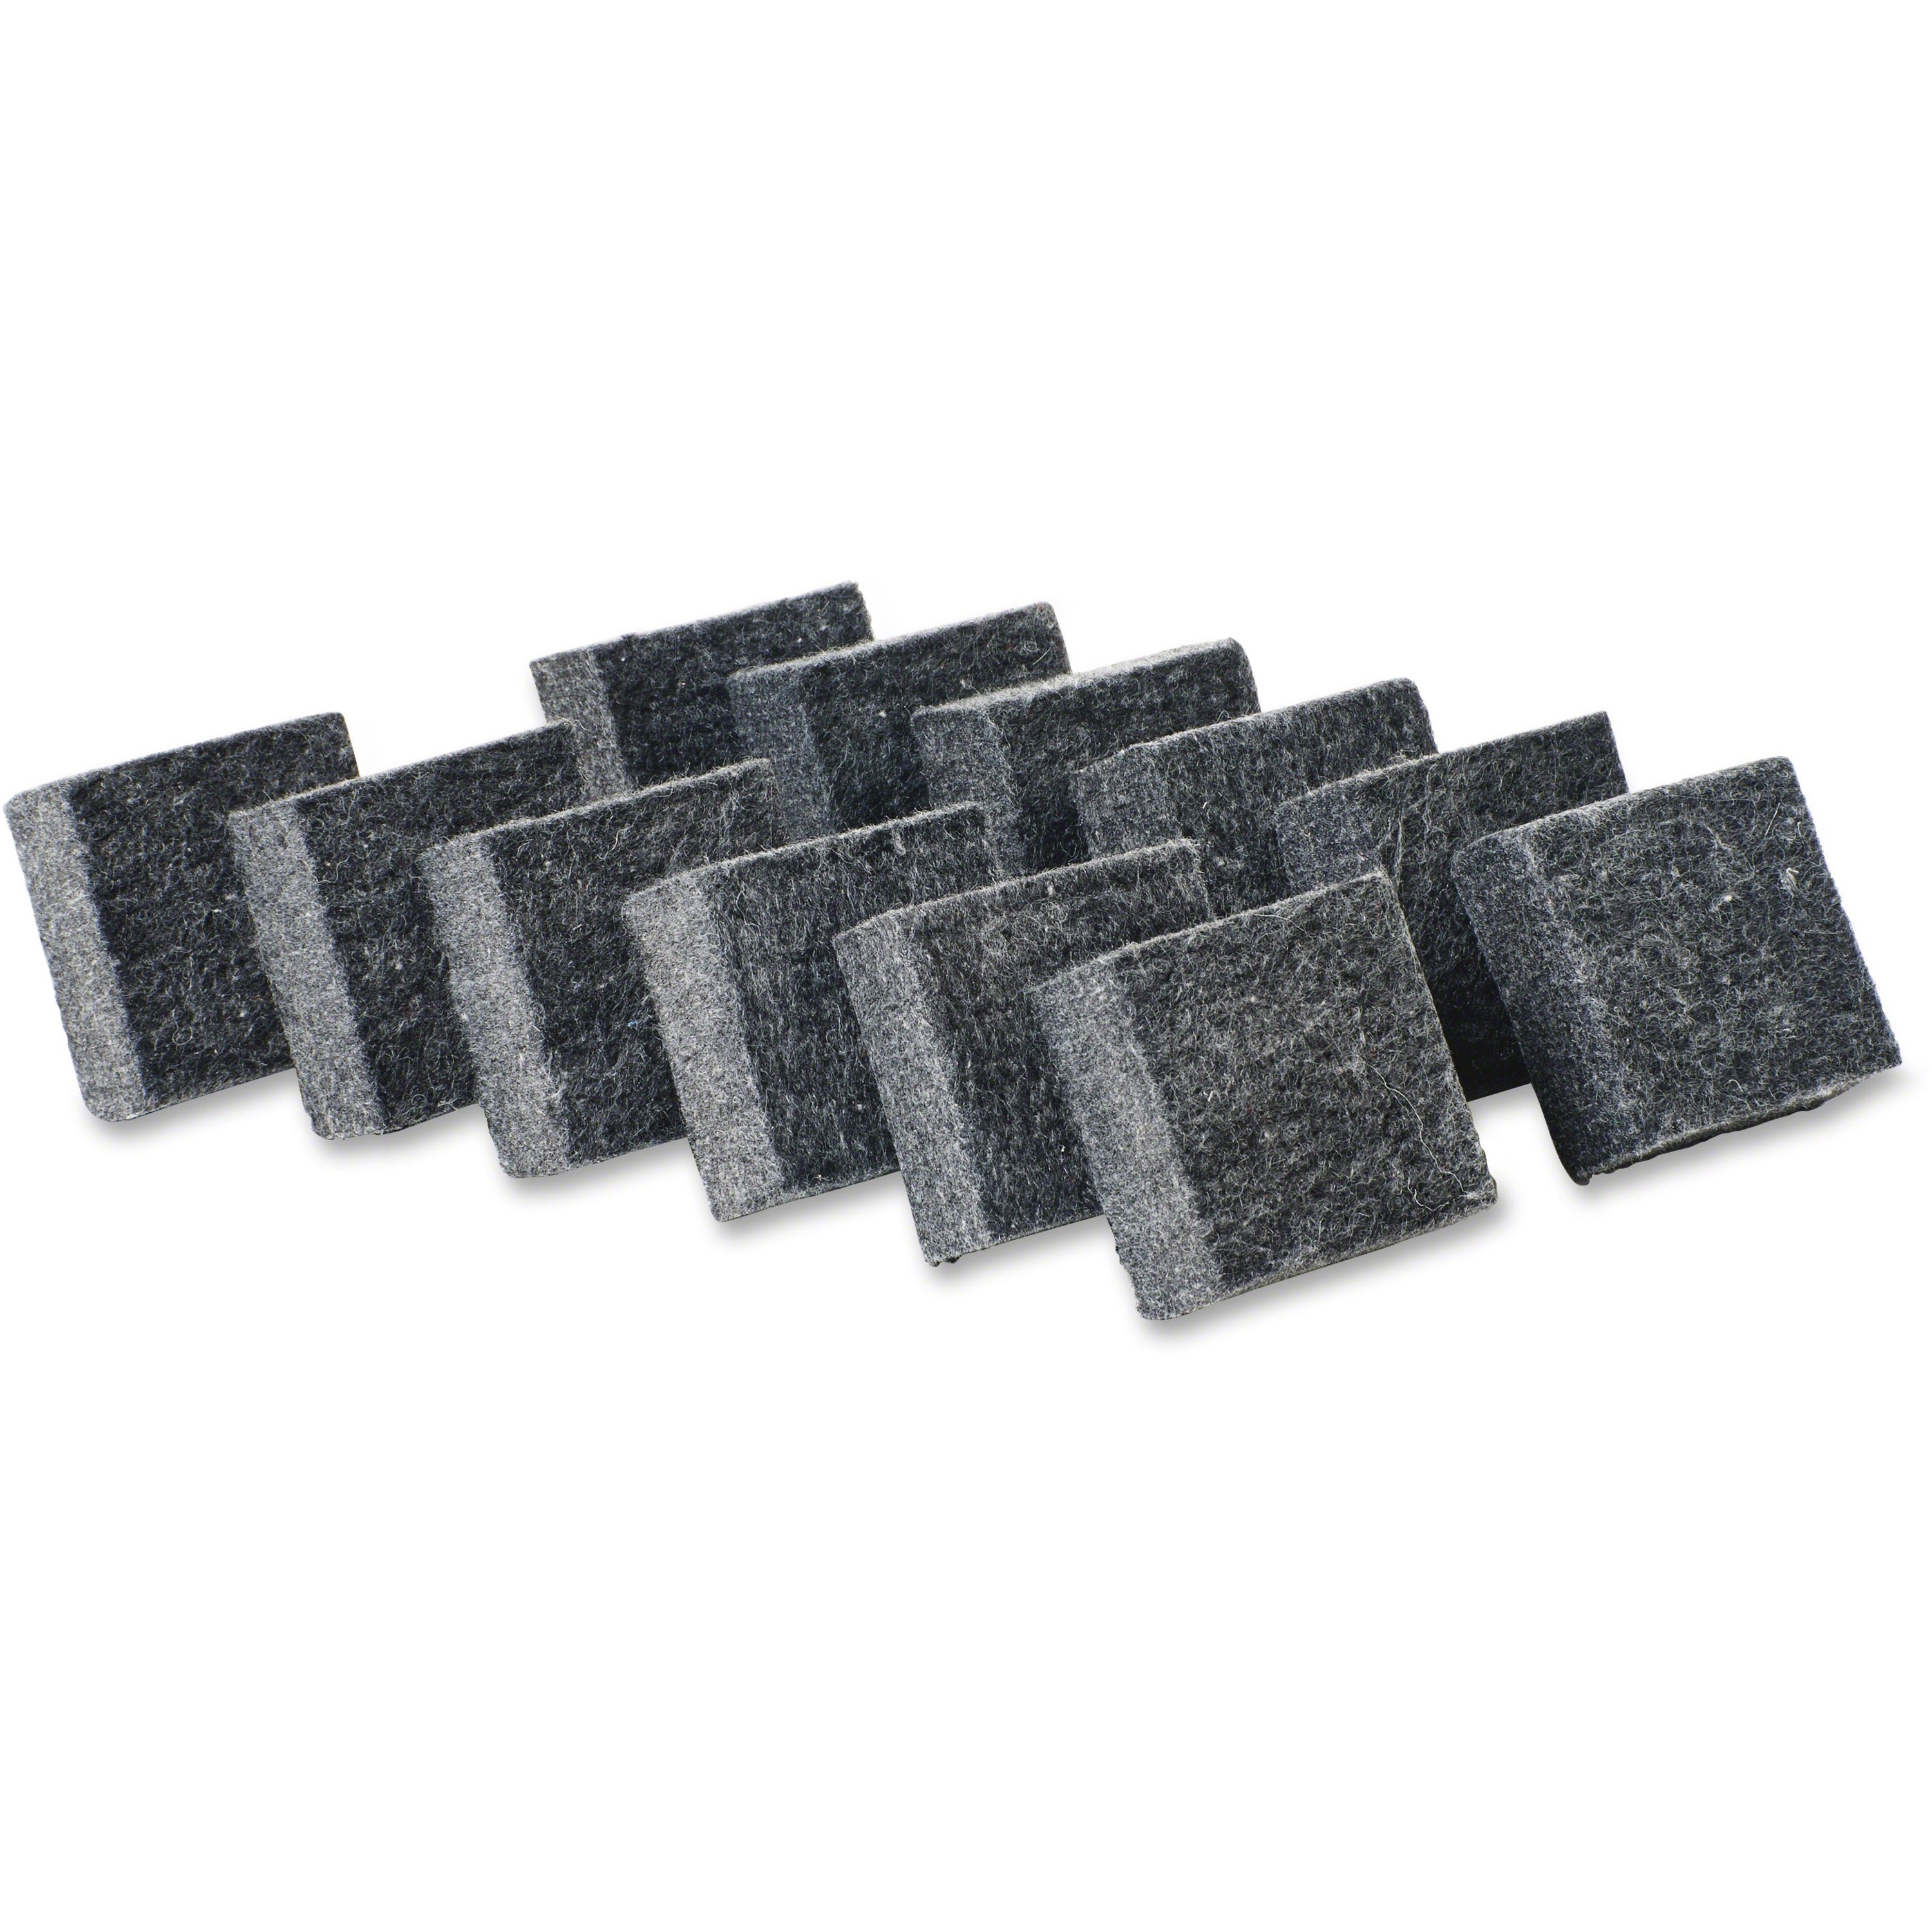 CLI Multi-purpose Eraser - 2" Width x 2" Length - Used as Mark Remover - Charcoal Gray - Felt - 12 / Pack - 